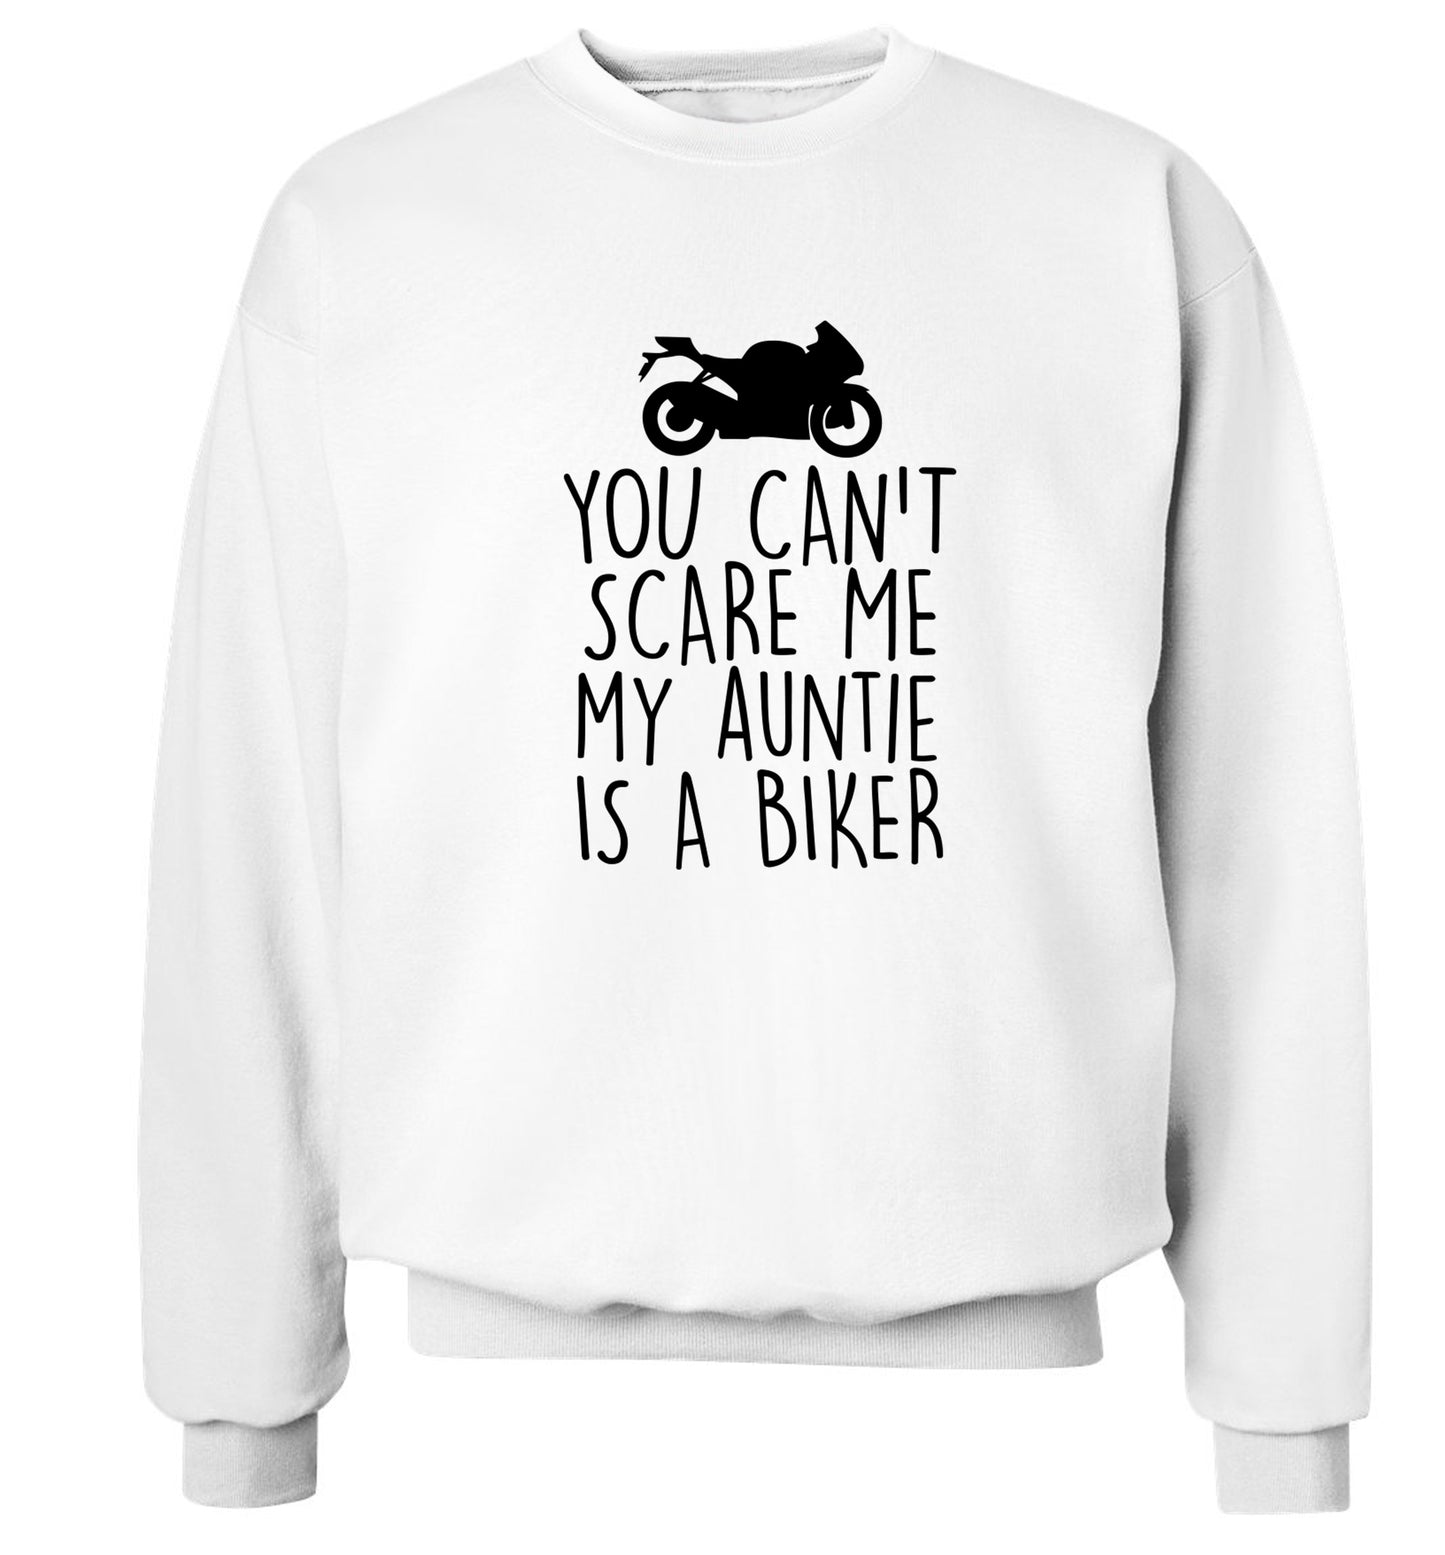 You can't scare me my auntie is a biker Adult's unisex white Sweater 2XL